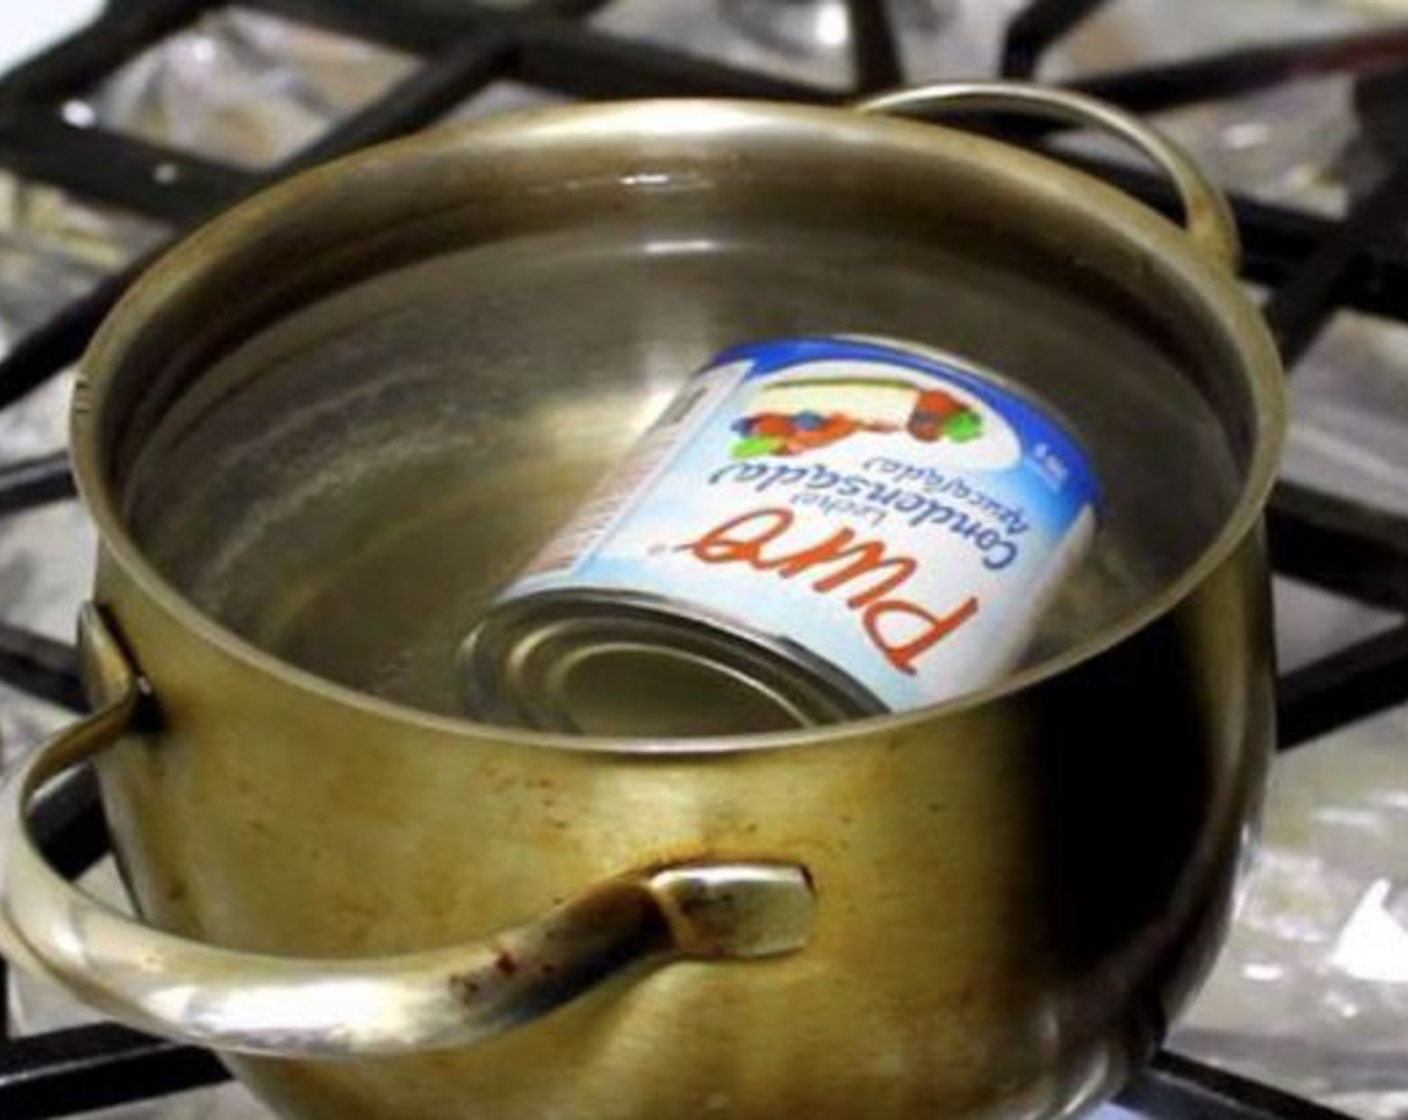 step 1 To make dulce de leche, place La Lechera® Sweetened Condensed Milk (1 1/3 cups) in a saucepan and cover with water.